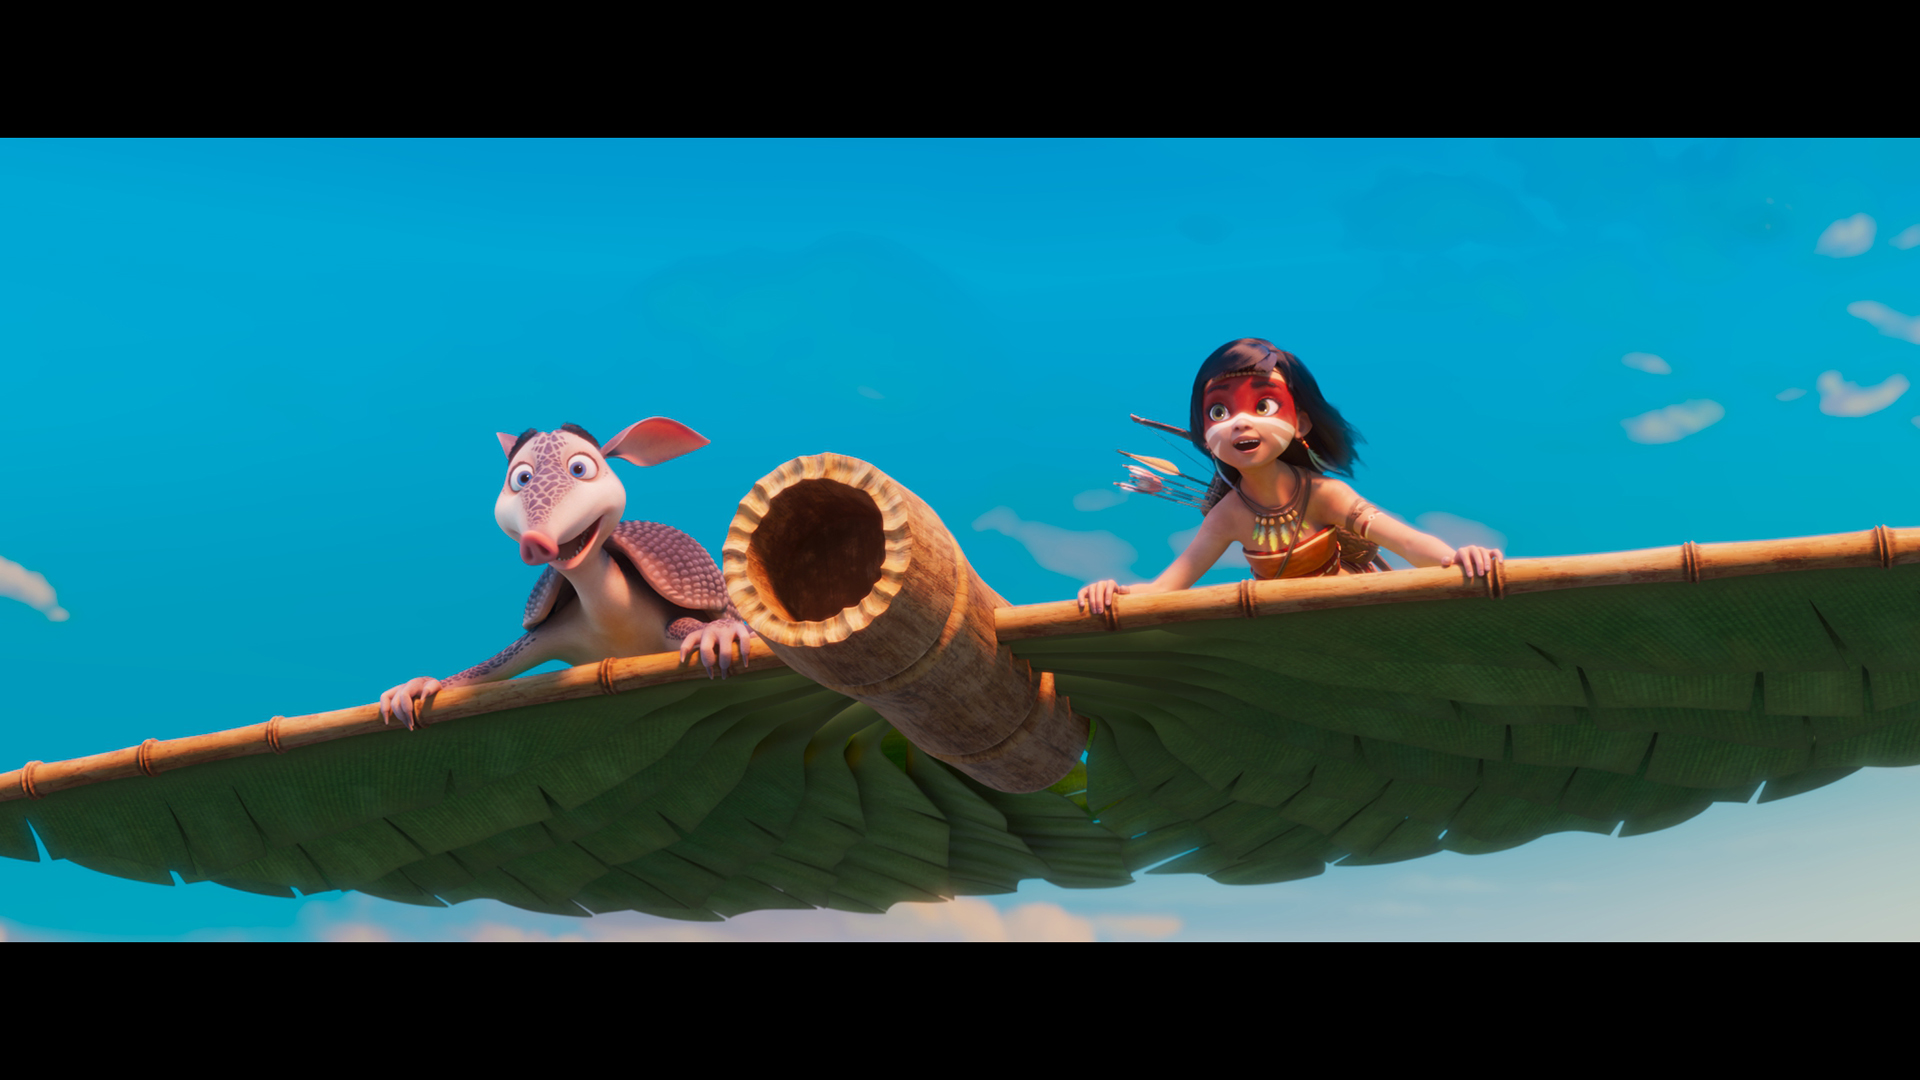 AINBO and Dillo flying over the rainforest - Une